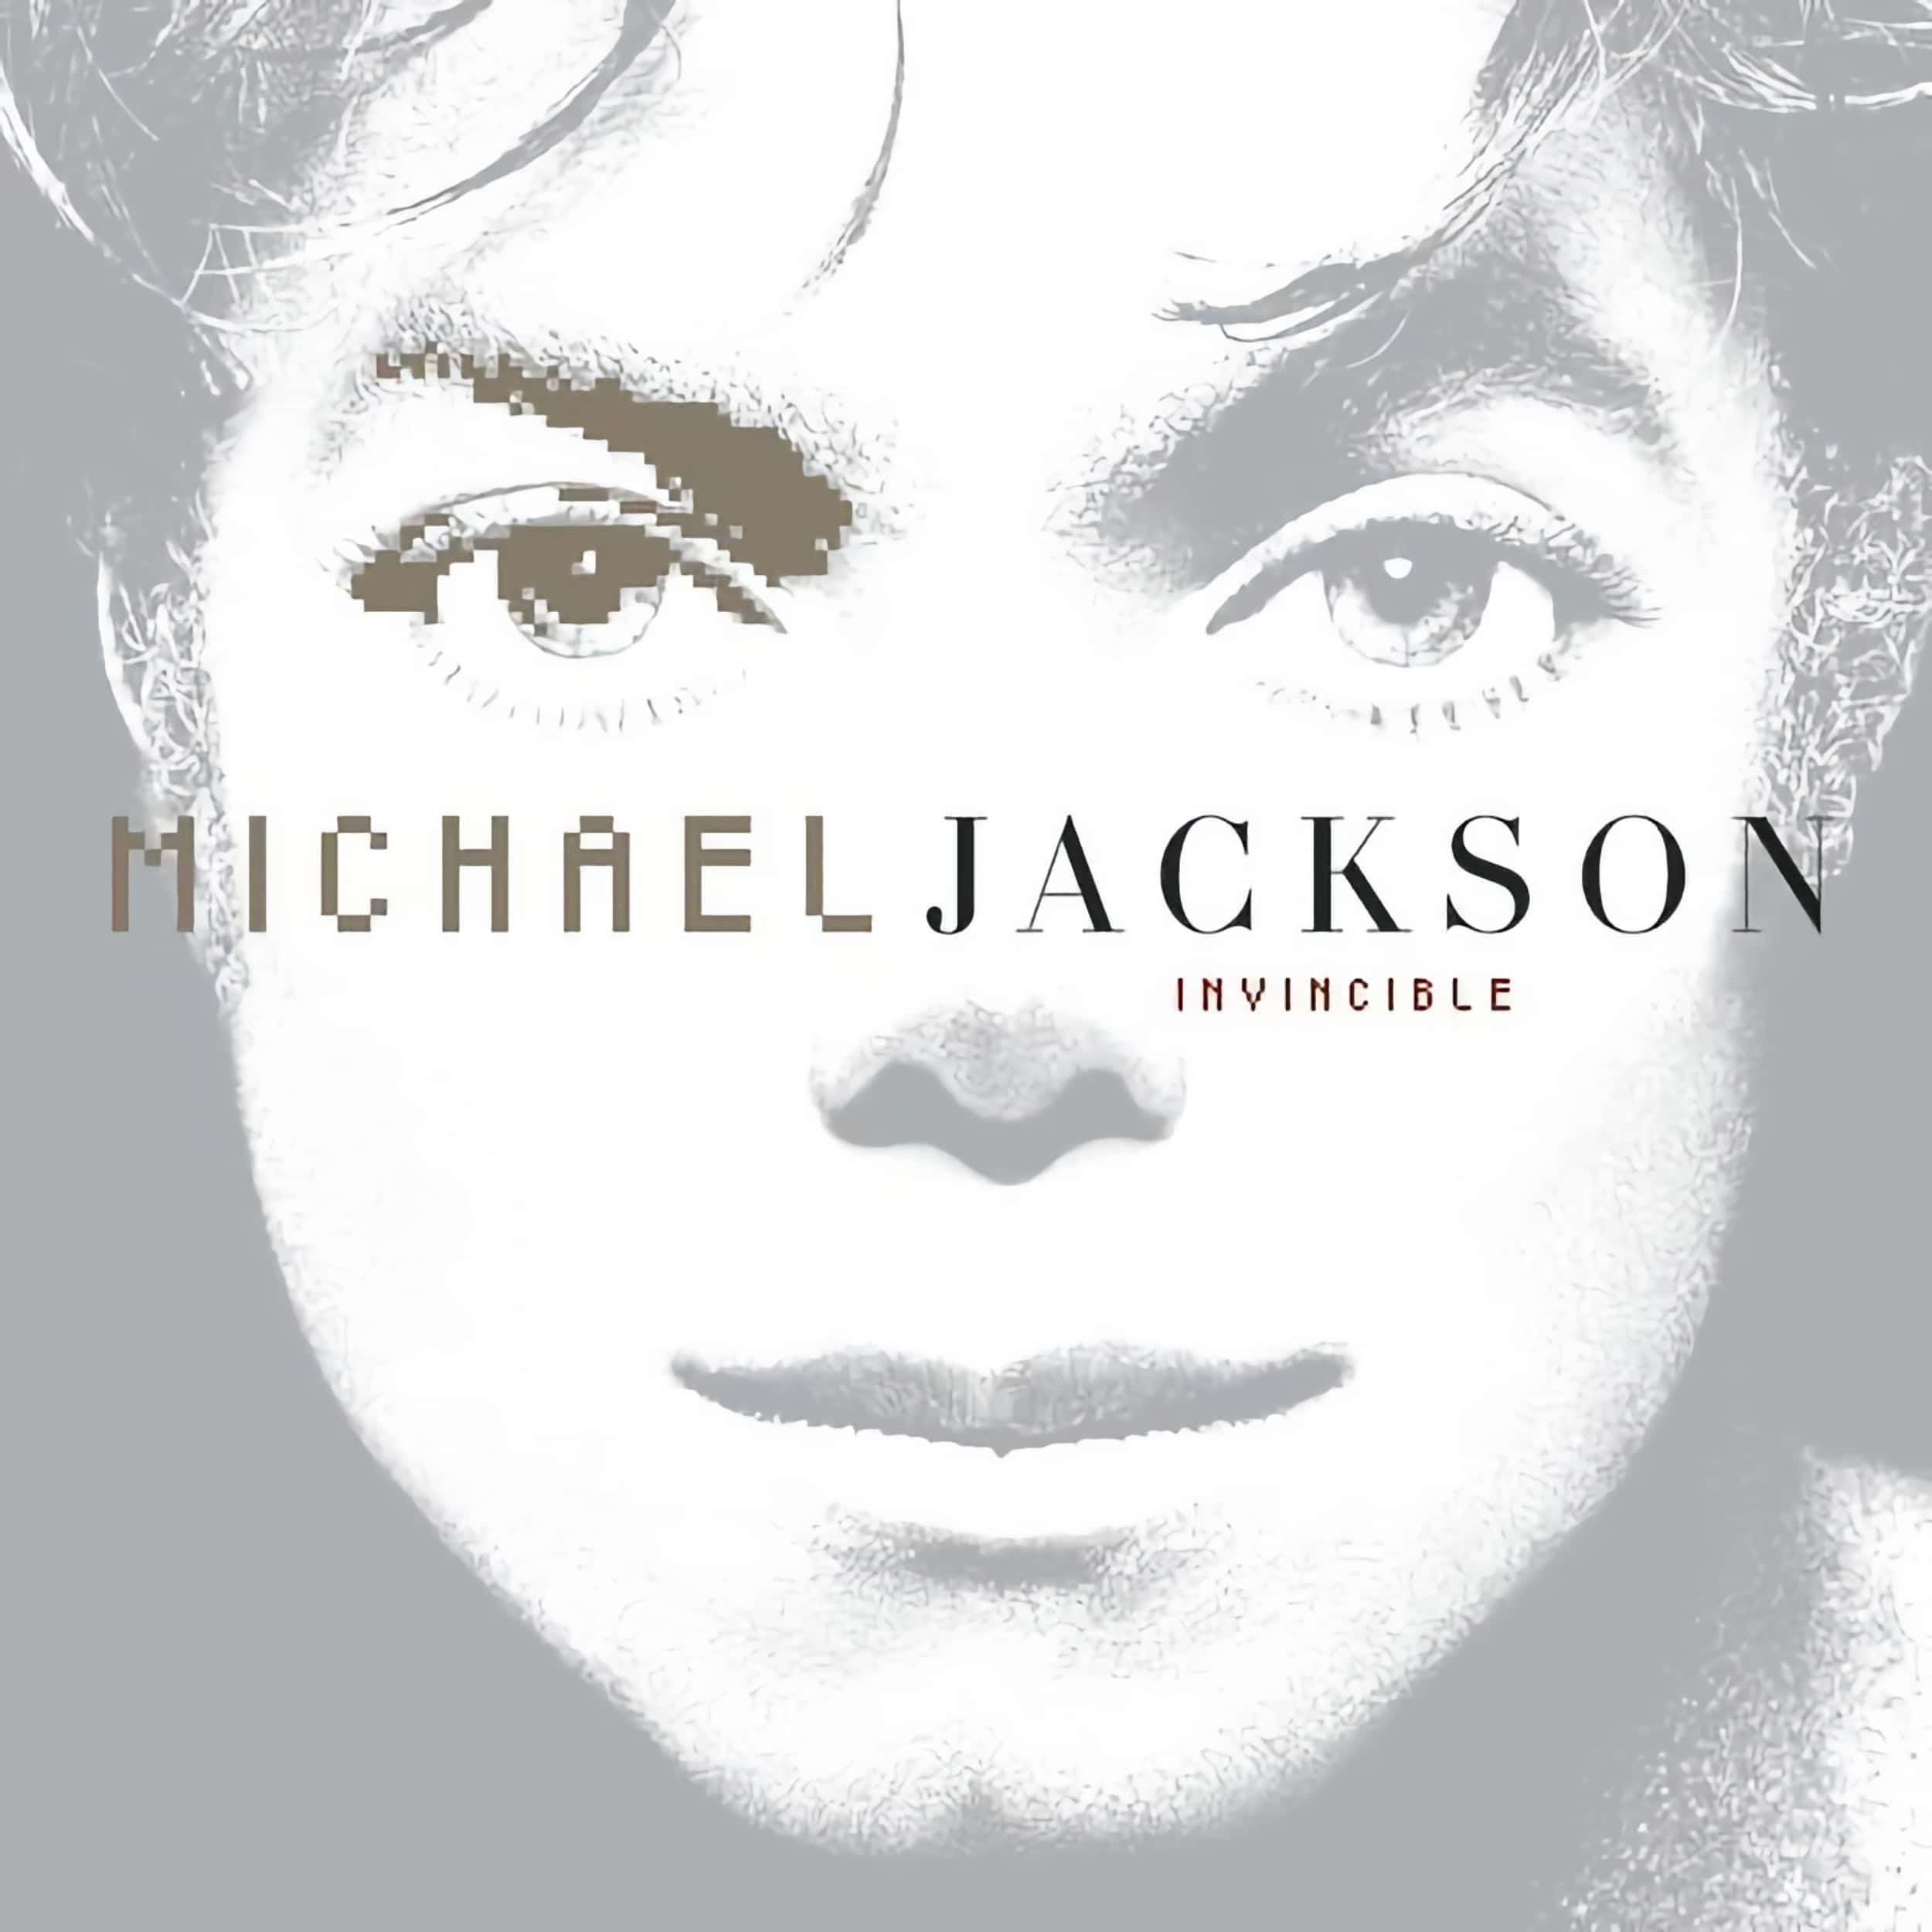 What is your all time favorite Michael Jackson album?